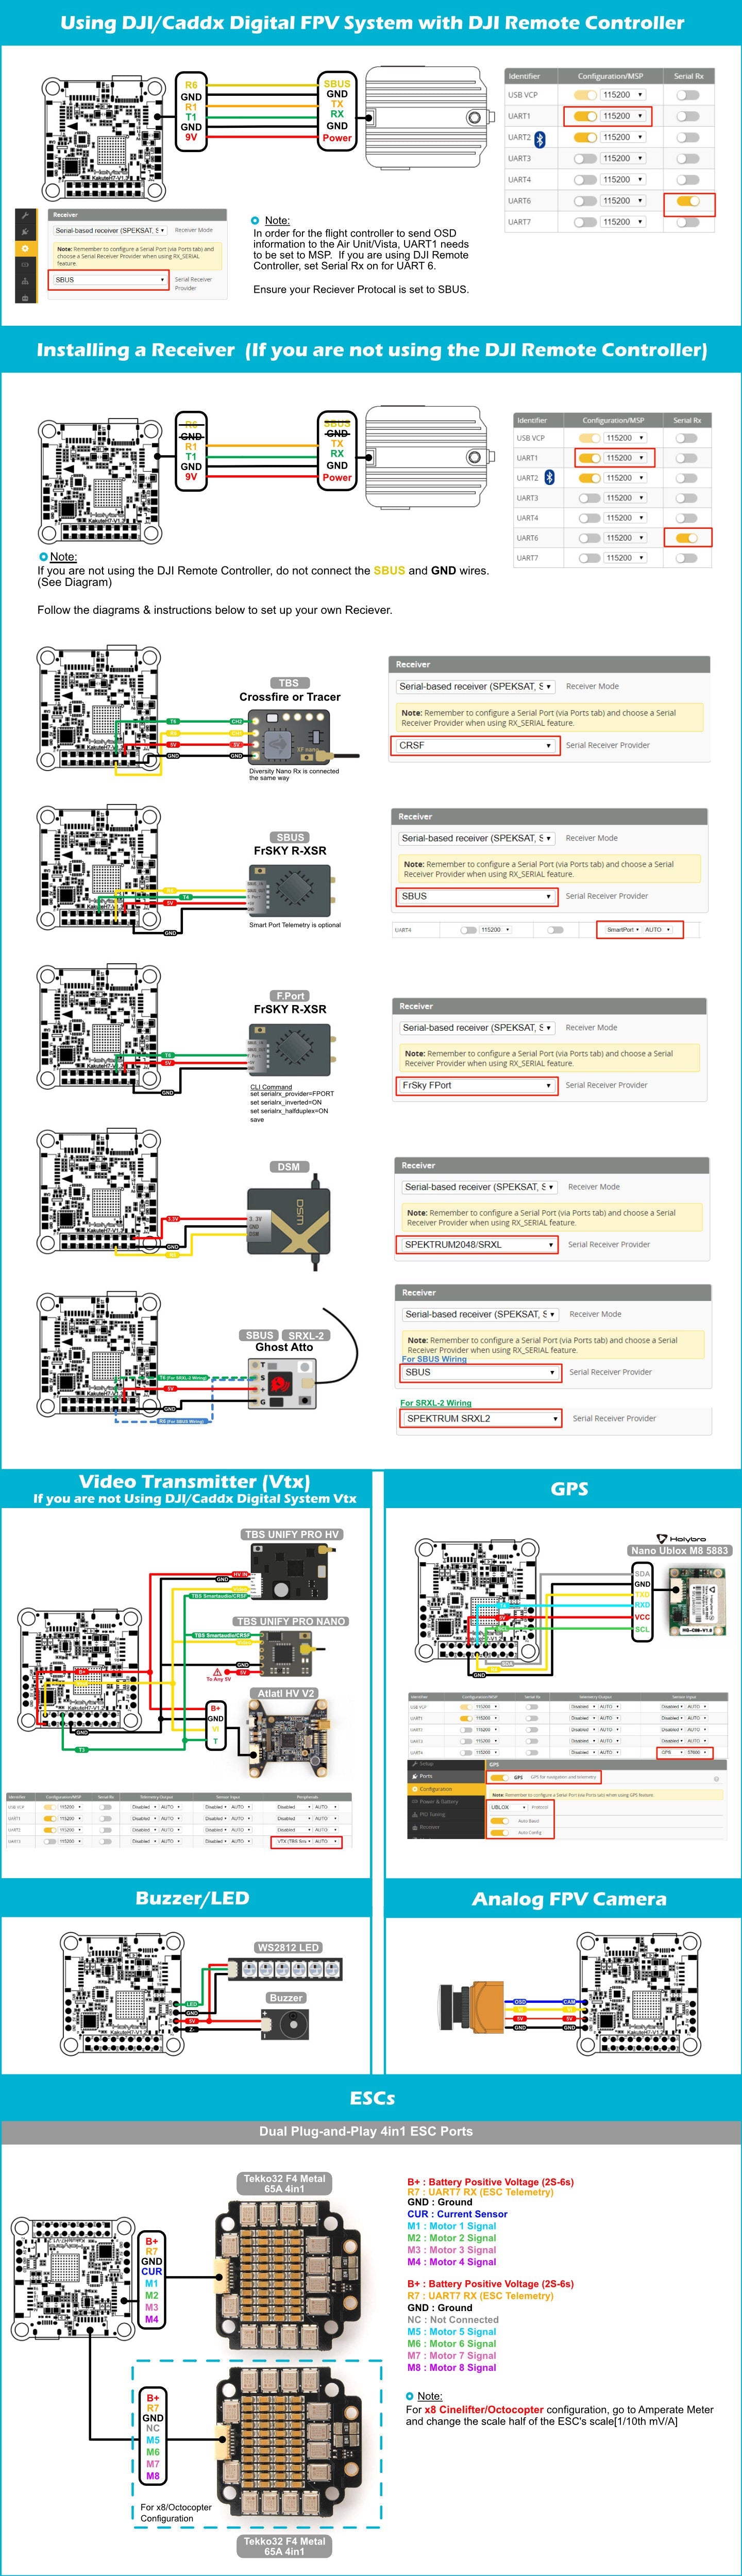 Follow the diagrams below to set up your own Reciever: Recciver TBS